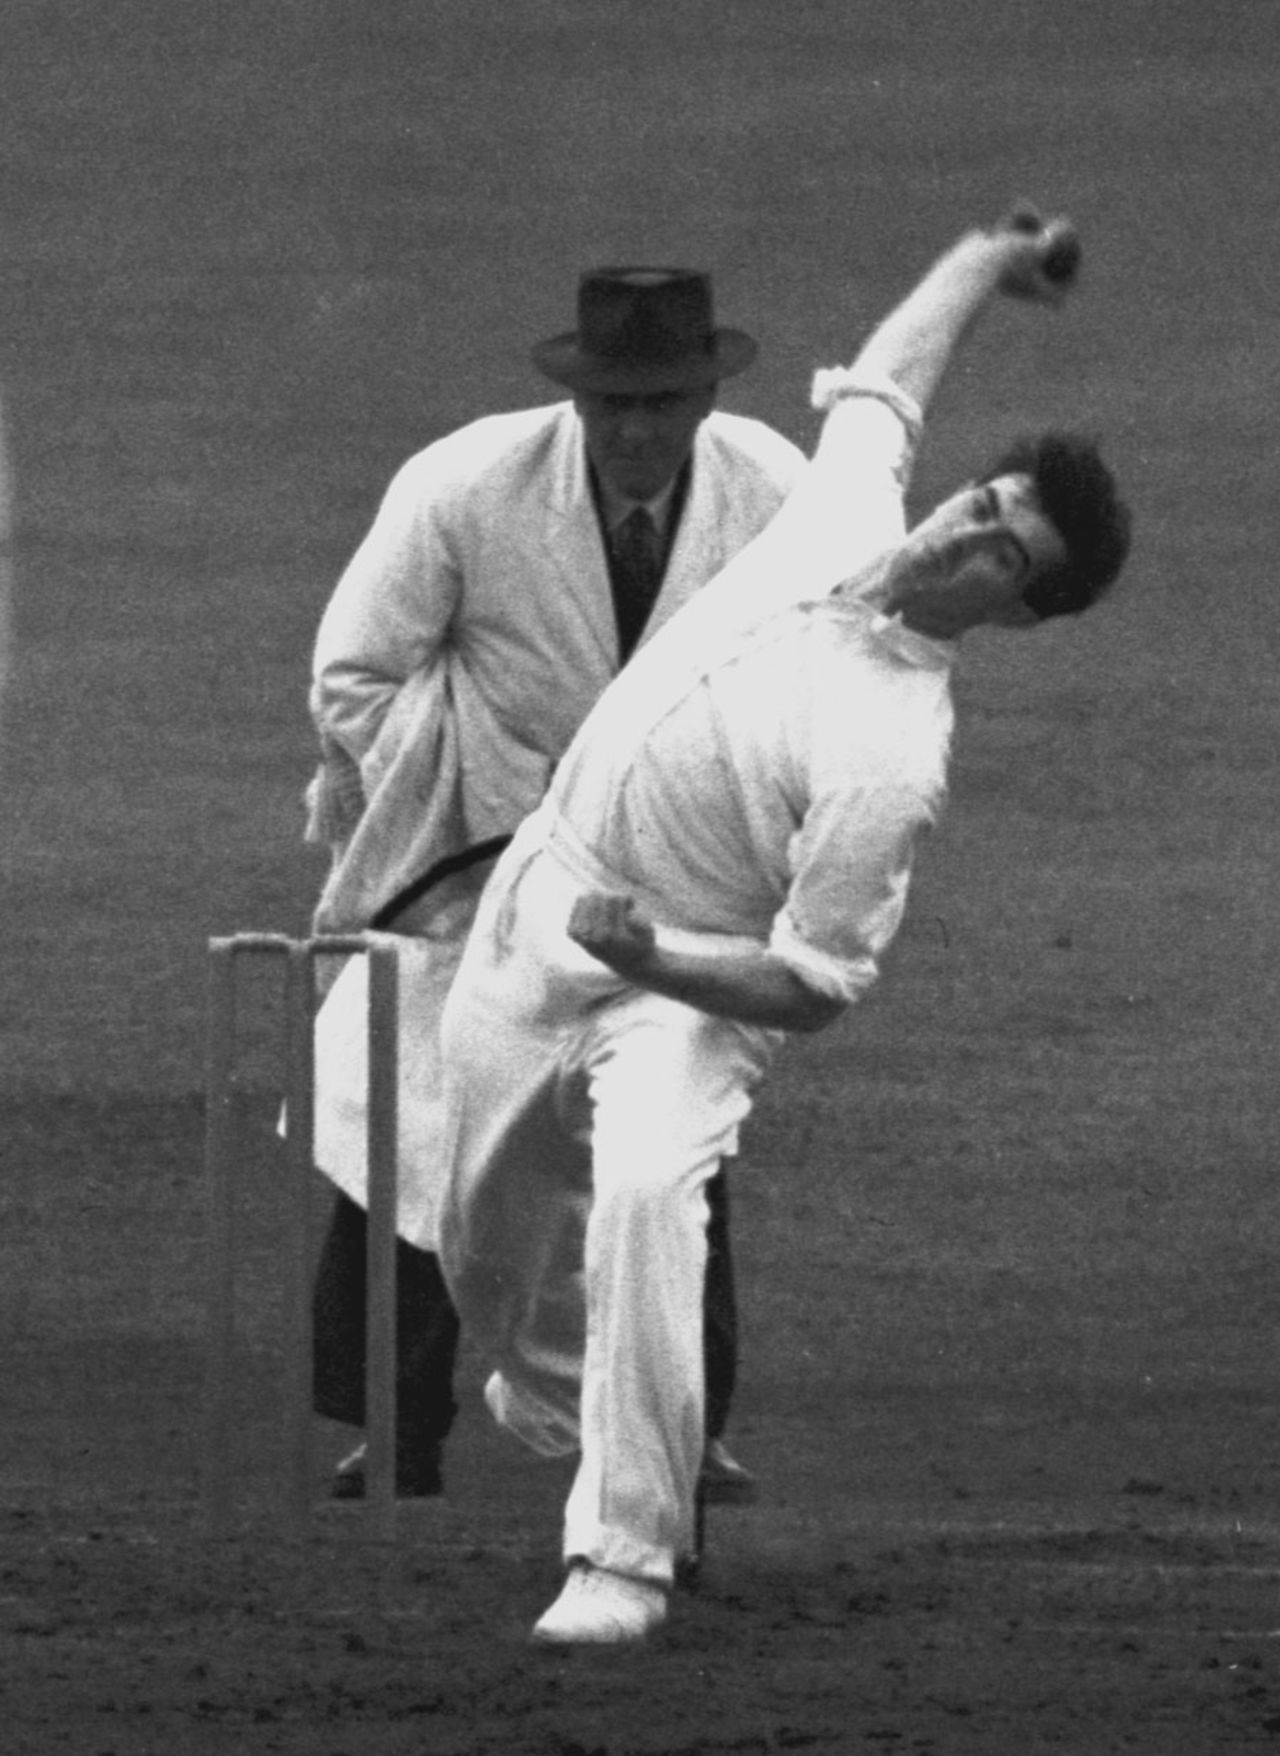 Fred Trueman during his 8 for 31 spell against India in 1952, England v India, 3rd Test, Old Trafford, 19 July, 1952